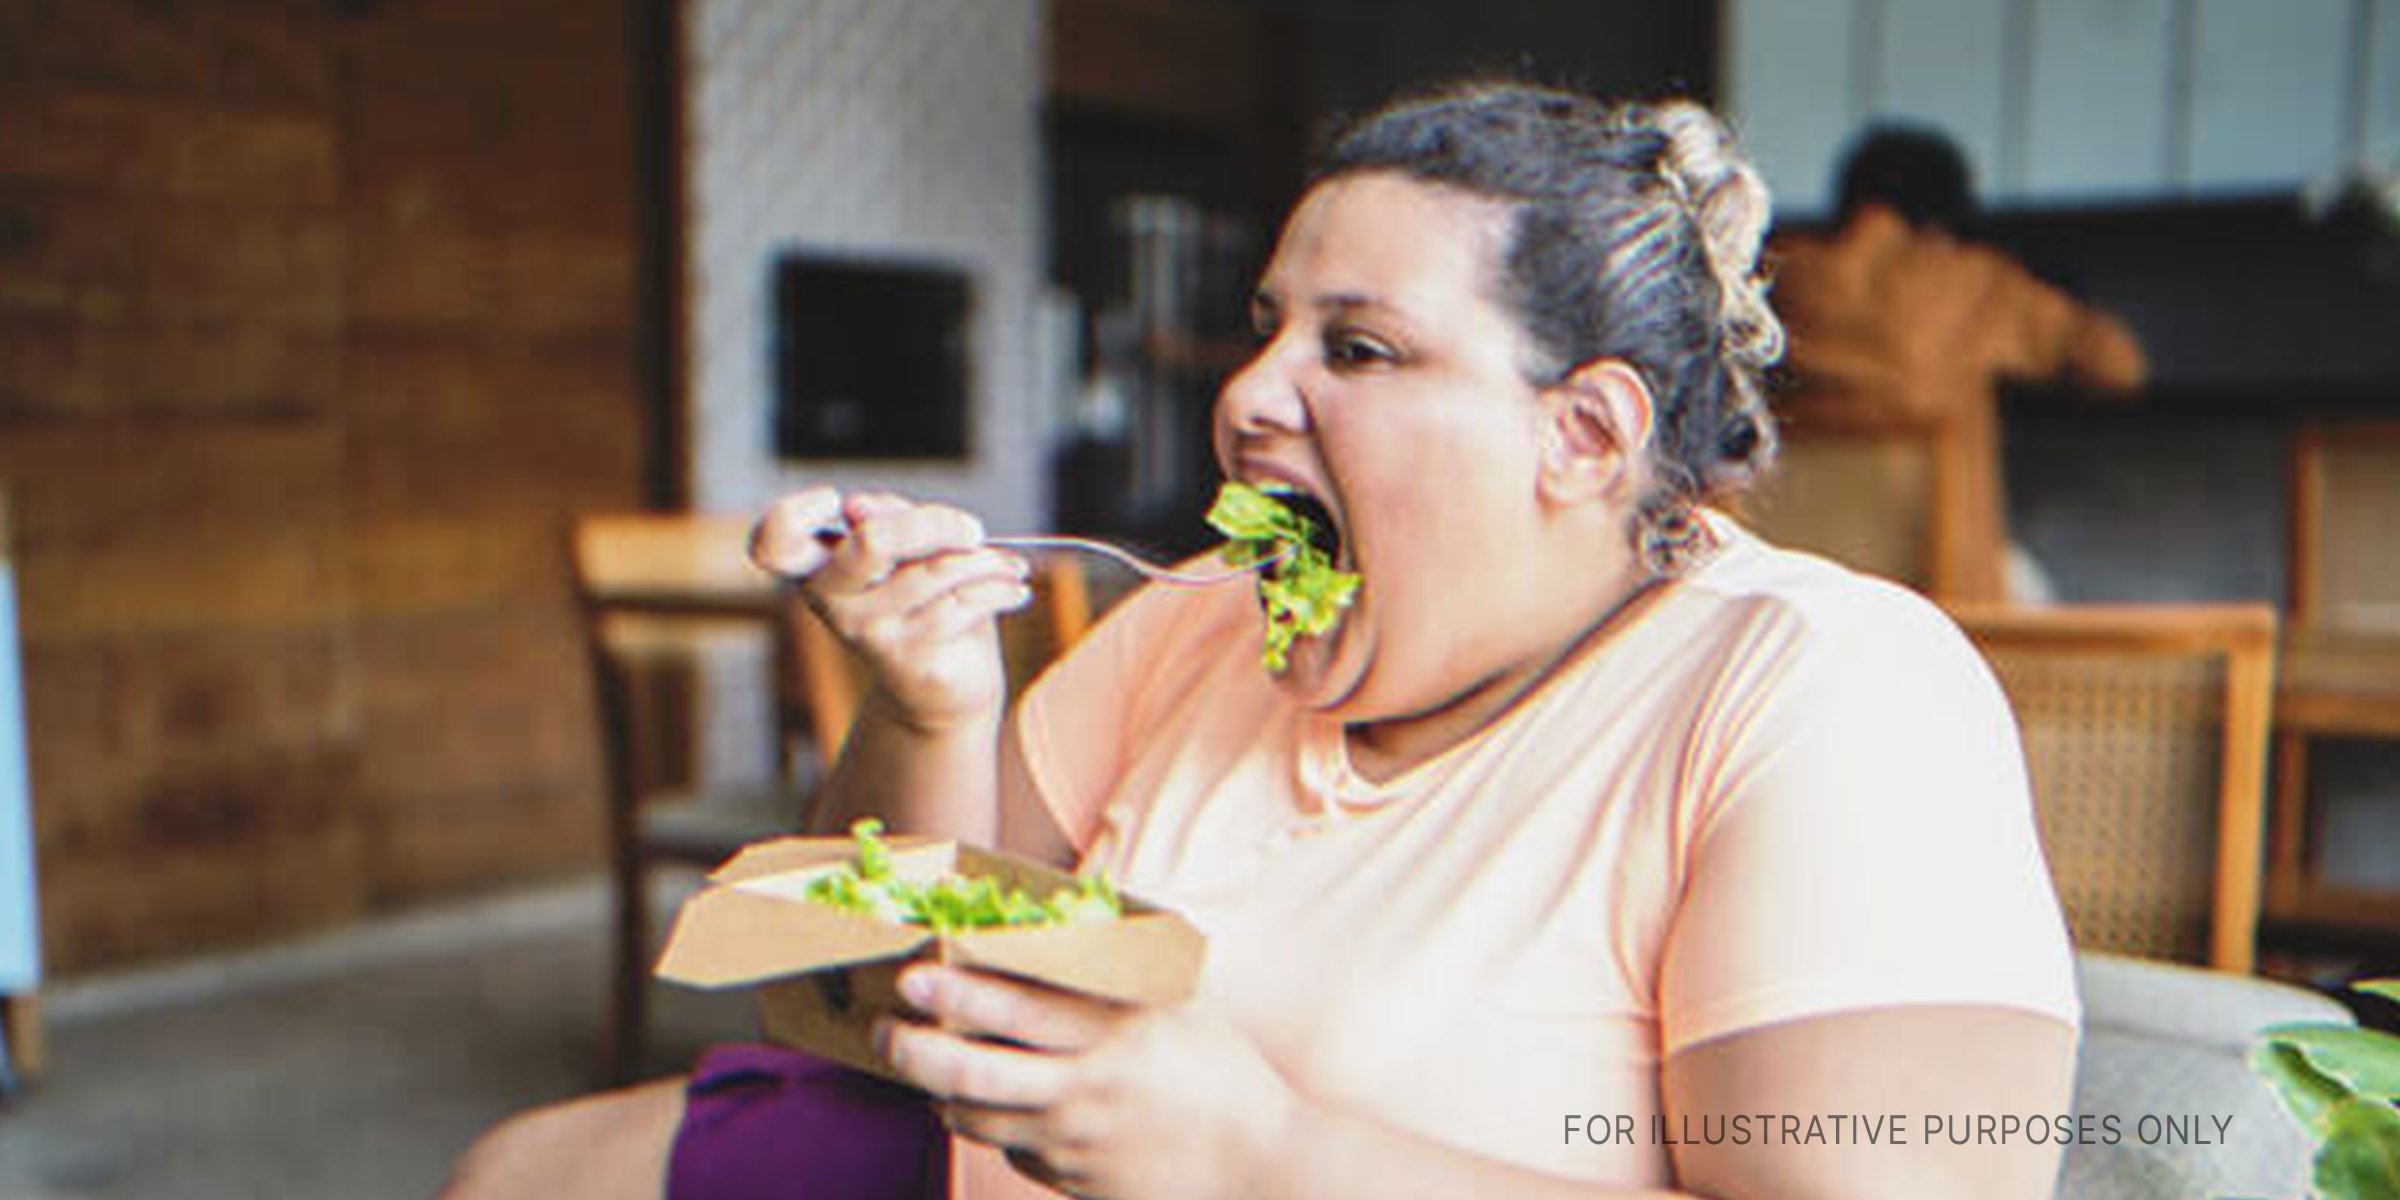 Chubby Woman Eating Salad. | Source: Getty Images